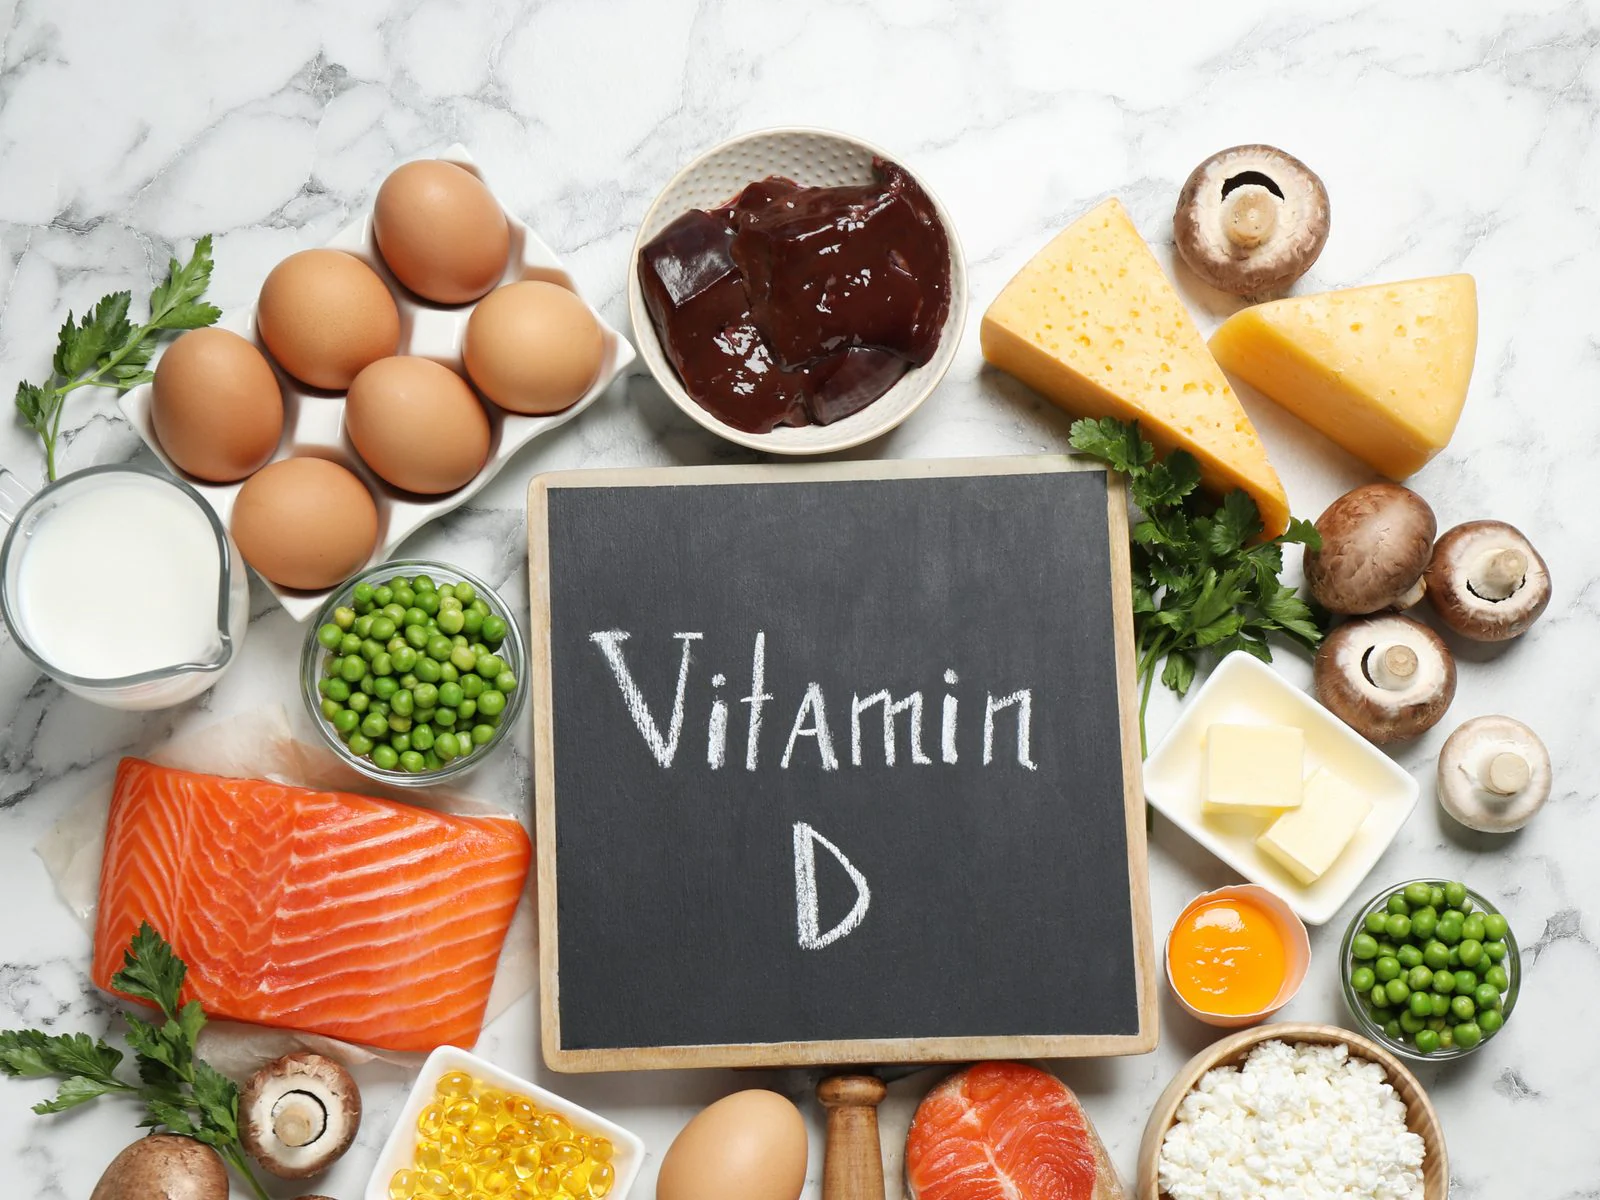 Vitamin D Status and Immune Response in Hospitalized Patients with Moderate and Severe COVID-19